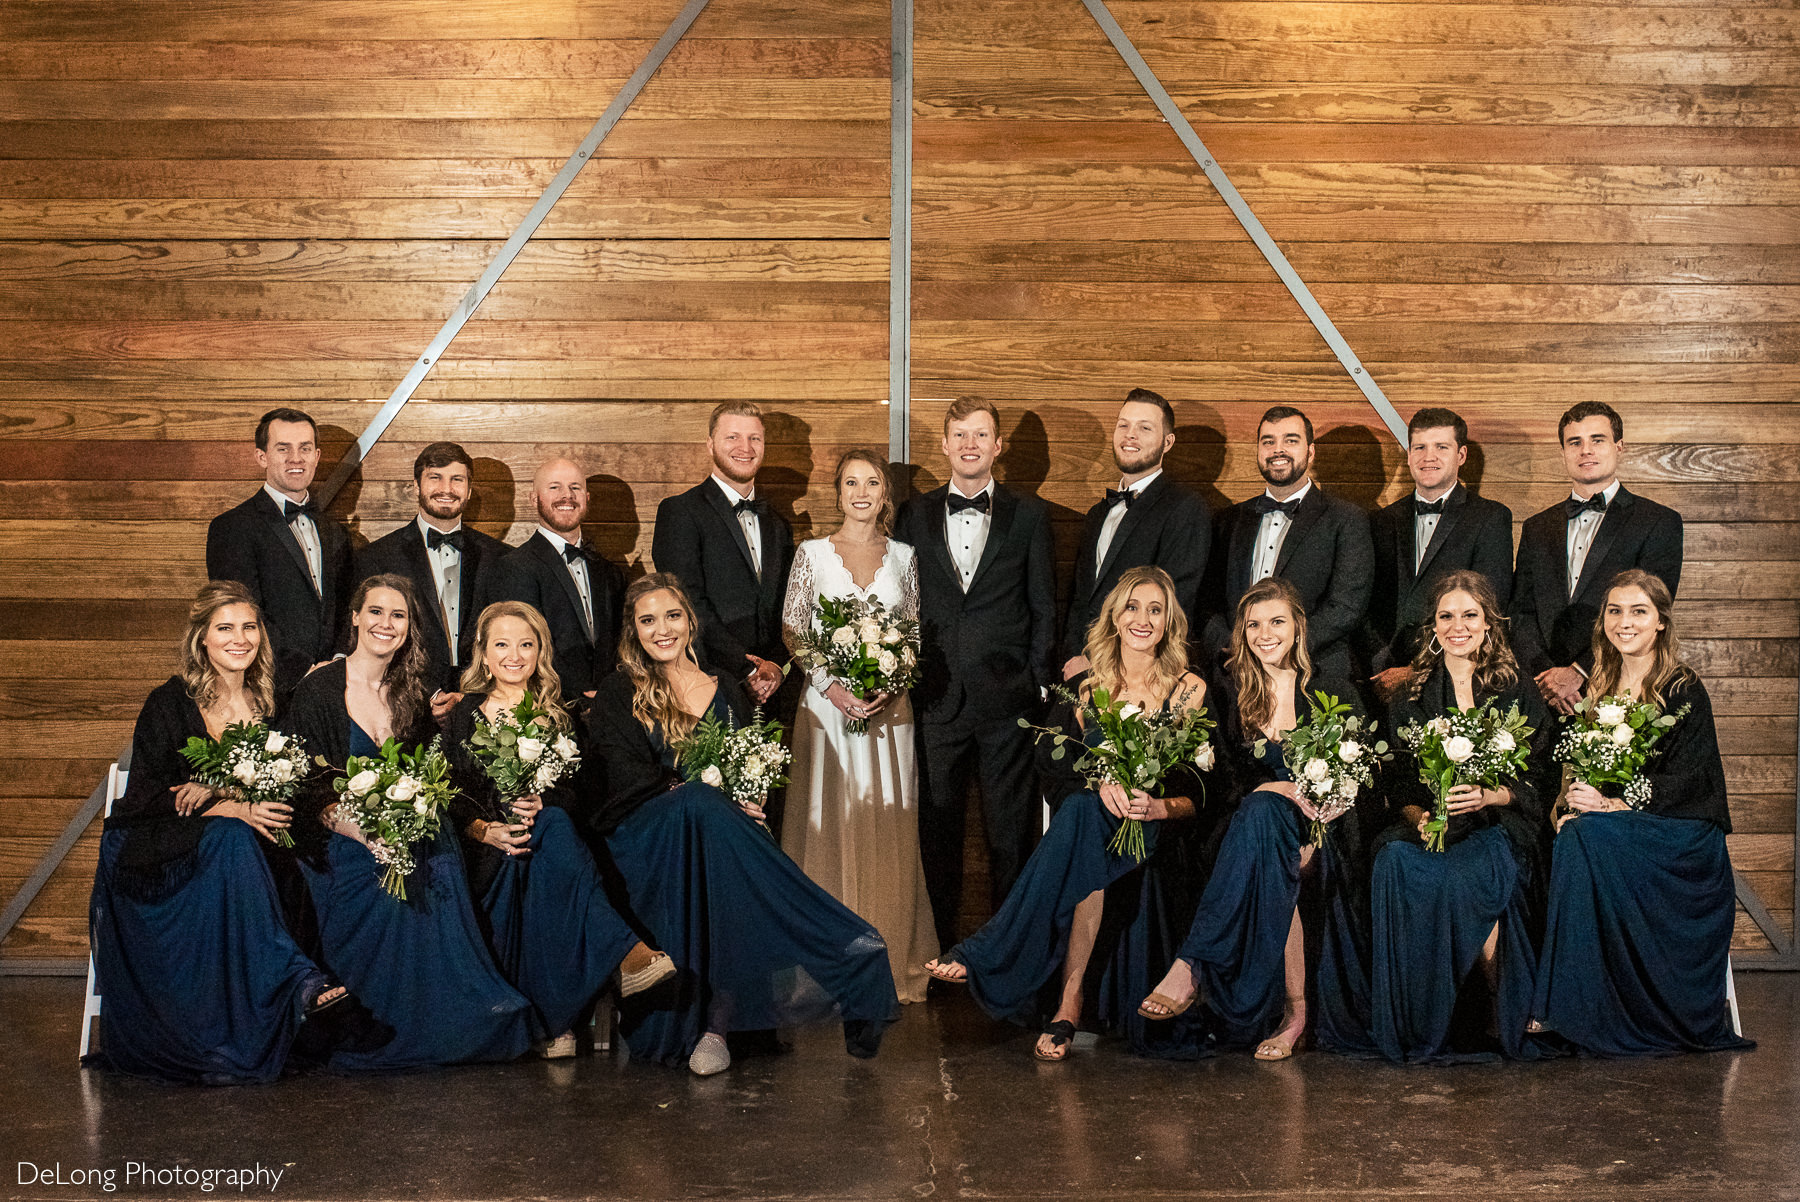 Full wedding party portrait where the bridesmaids are seated and the groomsmen are standing behind them in front of the wooden doors at the Westside warehouse in Atlanta by Charlotte wedding photographers DeLong Photography